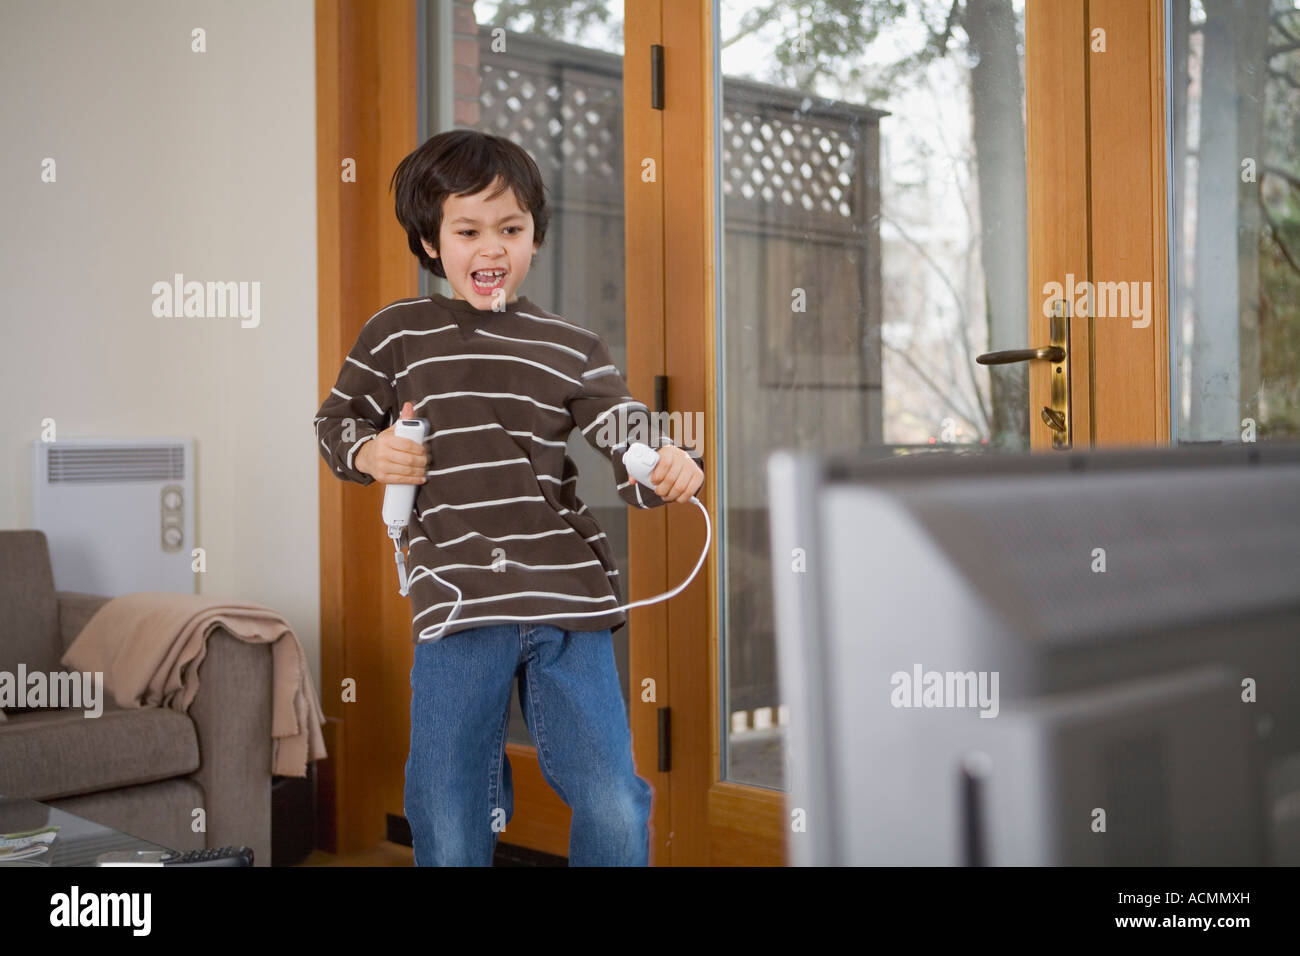 Little boy having a blast of fun, playing with the popular wireless video game Nintendo Wii. Model Released Stock Photo